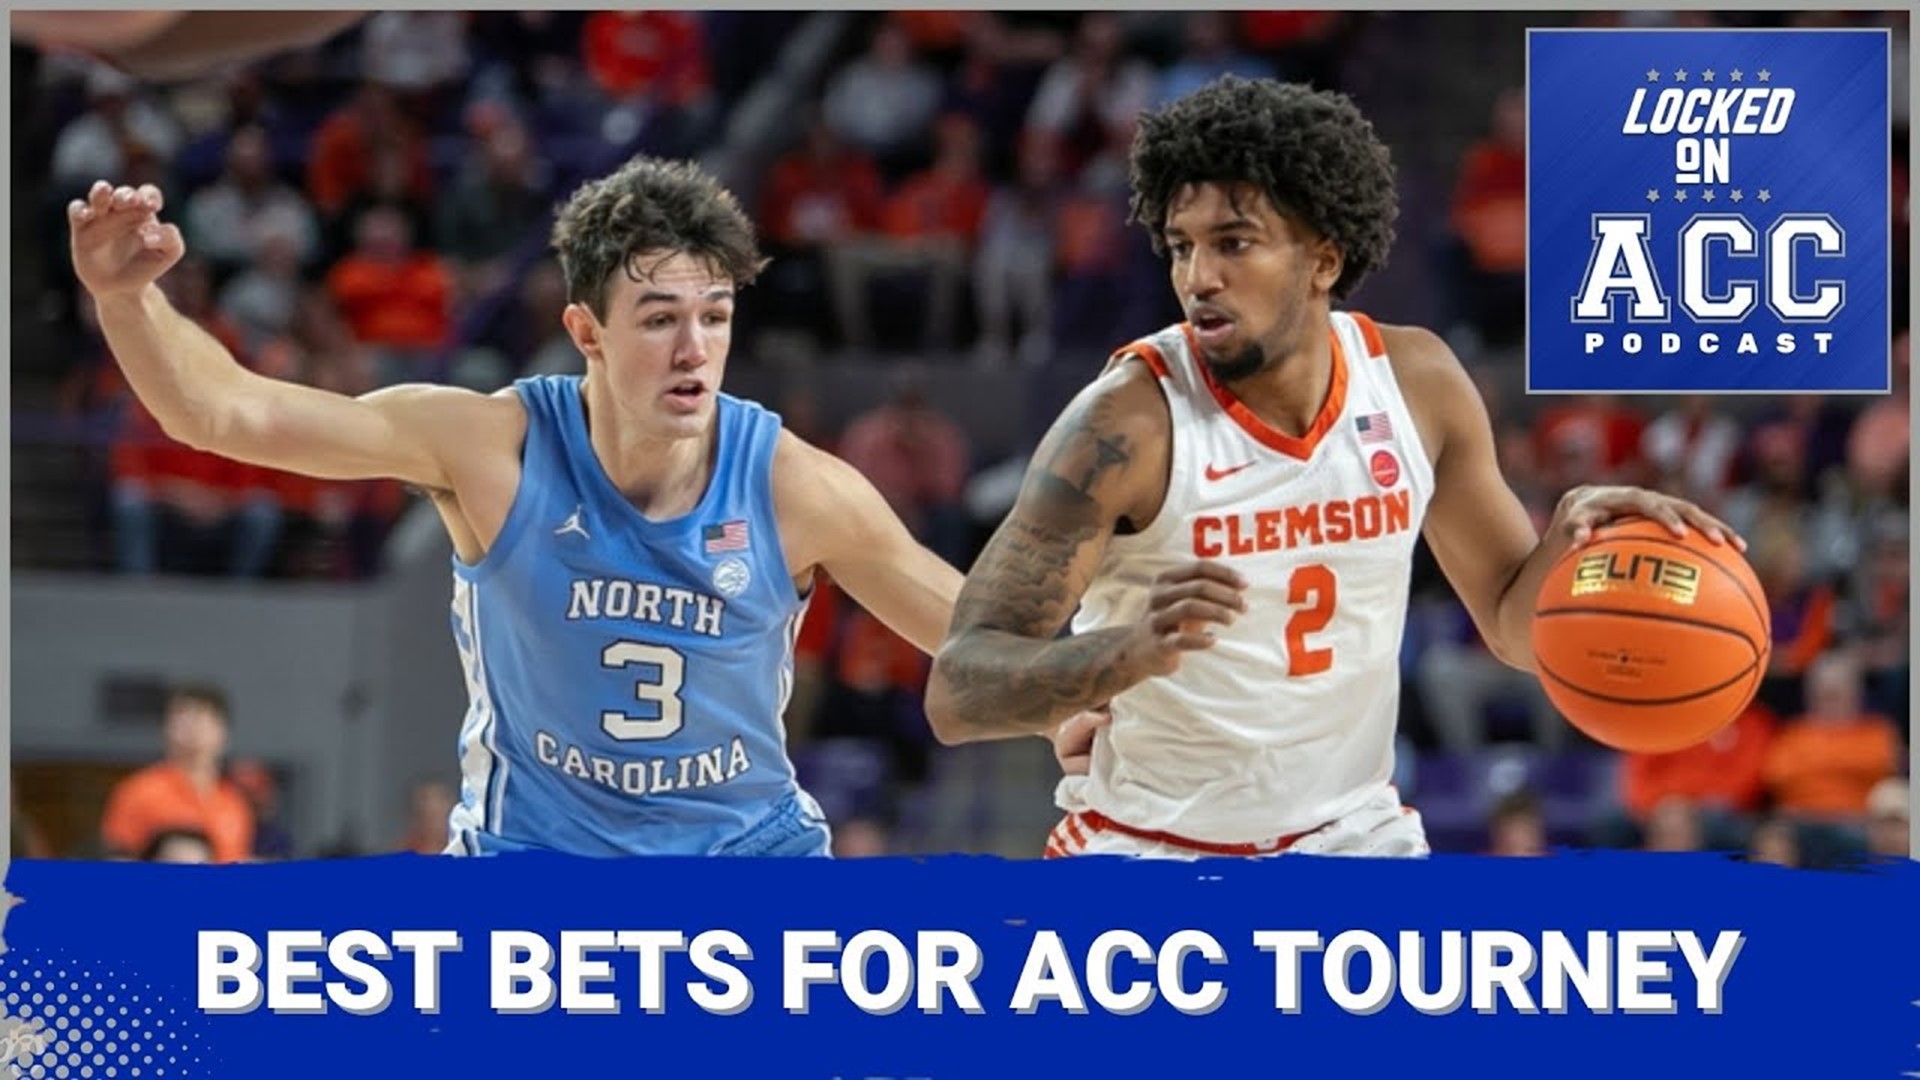 In this episode, Kenton has on special guest Mike Randle to talk best bets and smart money for the ACC postseason